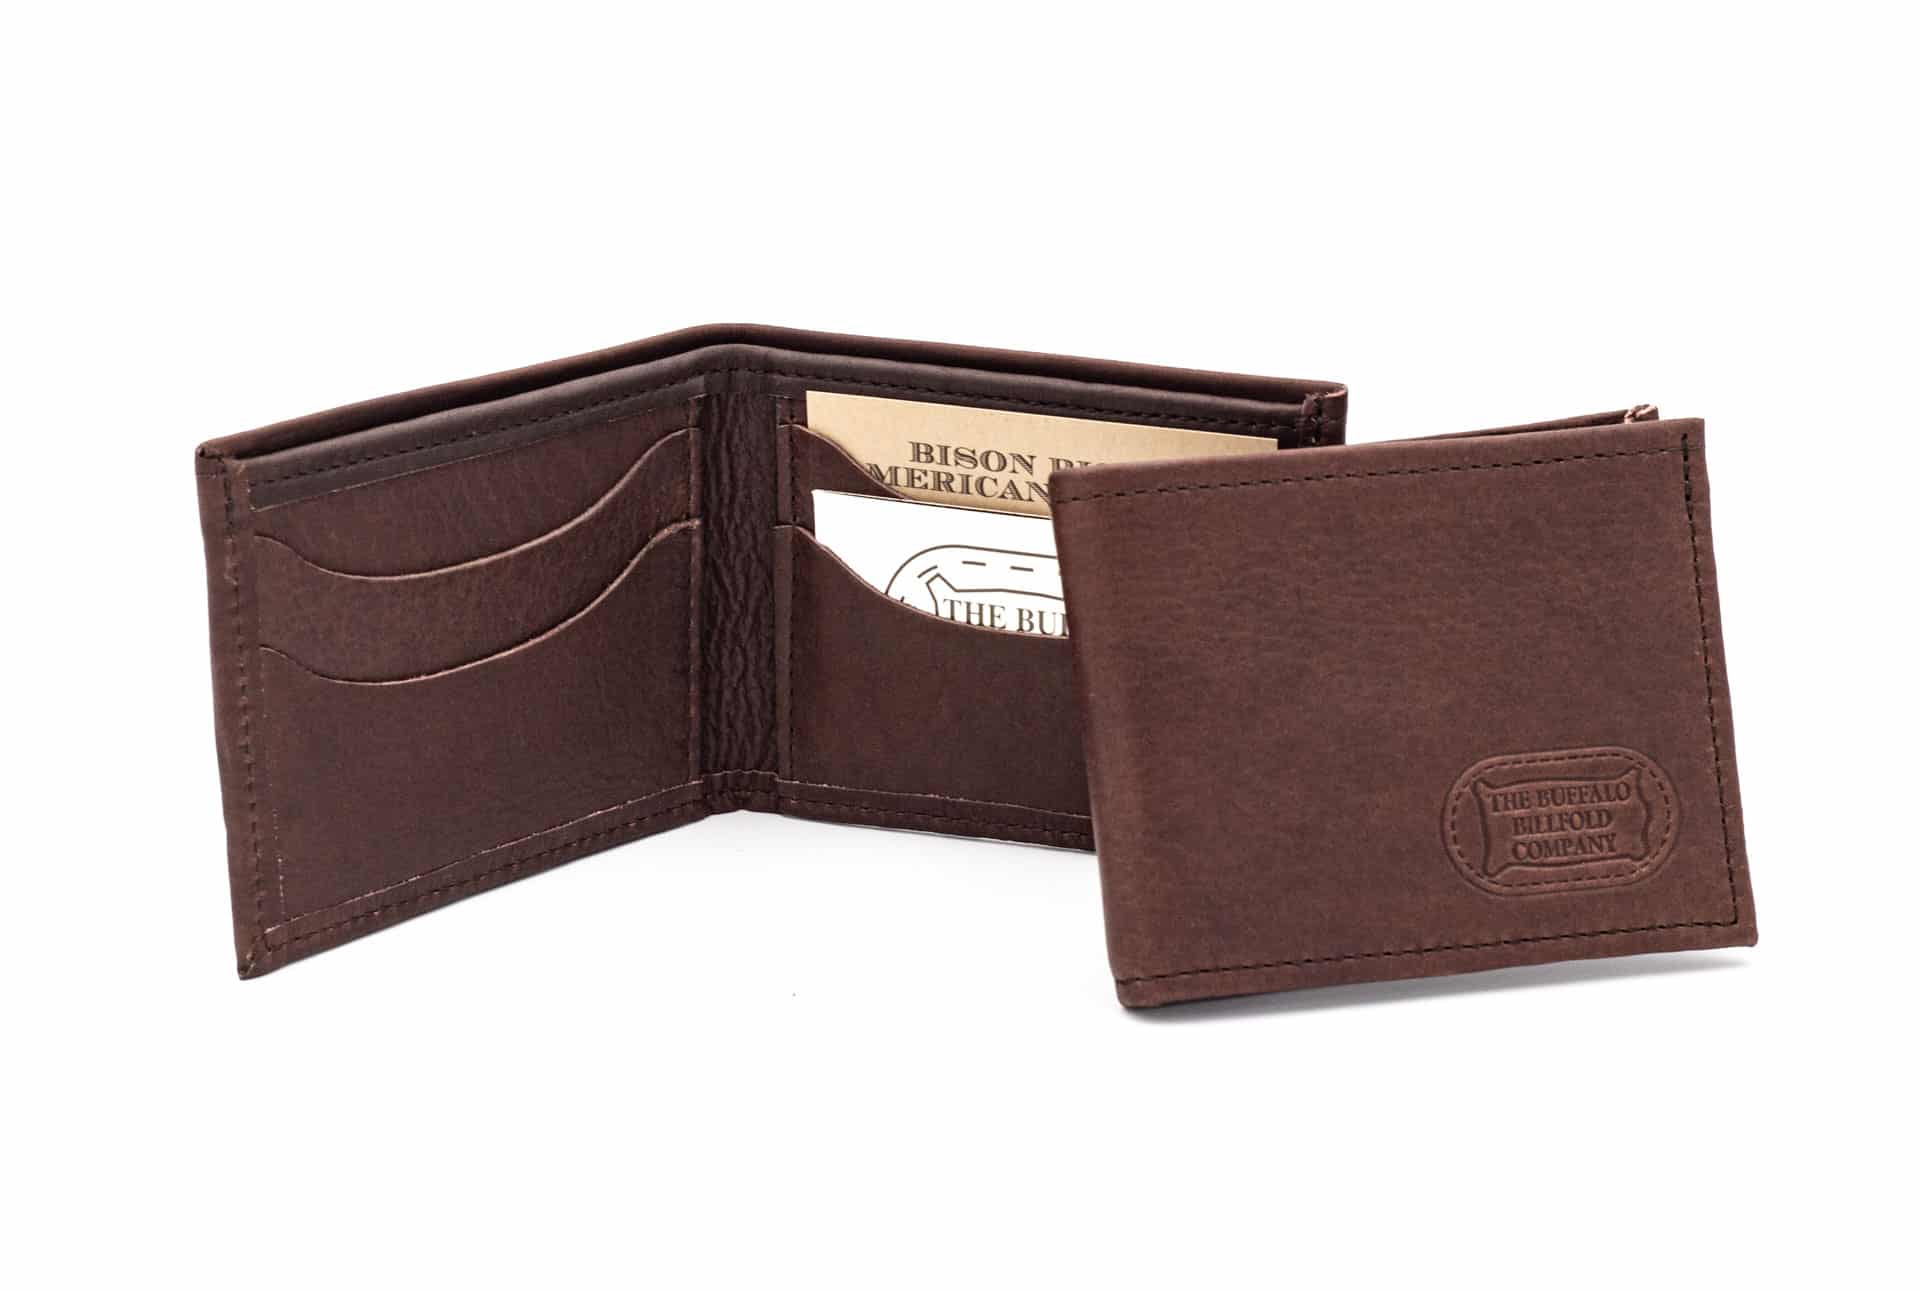 Best Selling Leather Goods Sample Pack – Buffalo Billfold Company